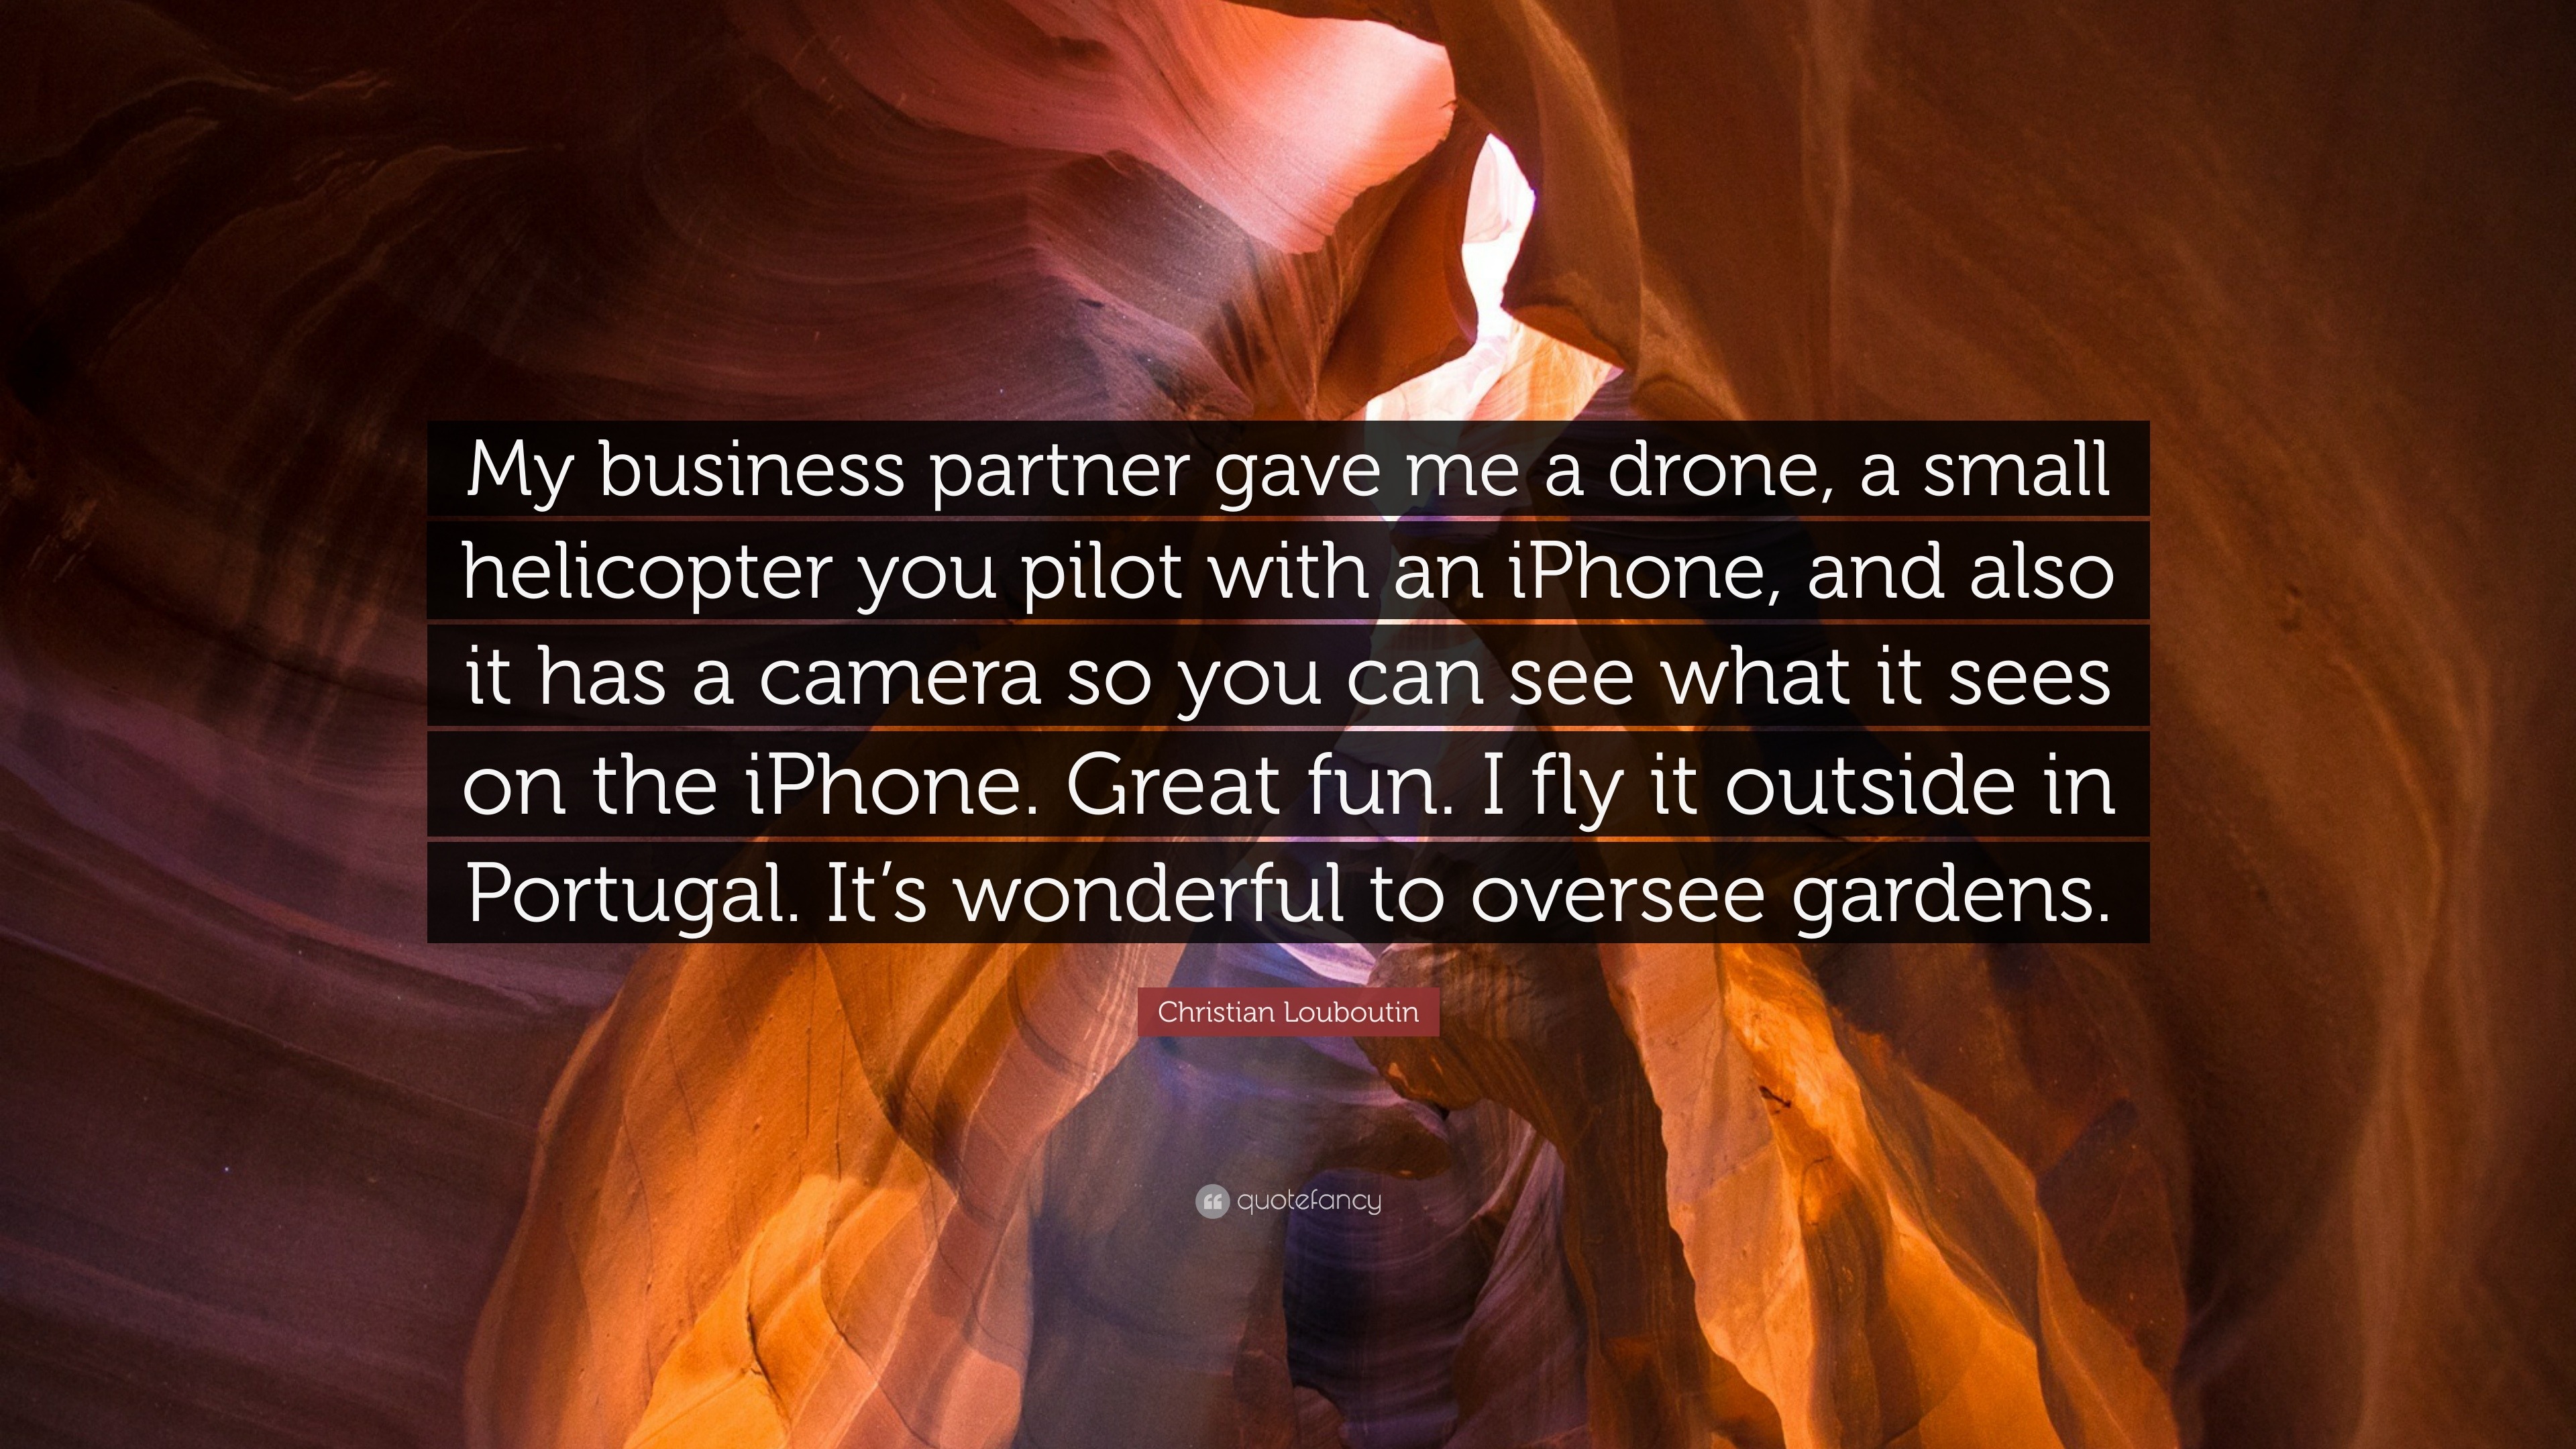 Christian Louboutin Quote: “My business partner gave me a drone, a